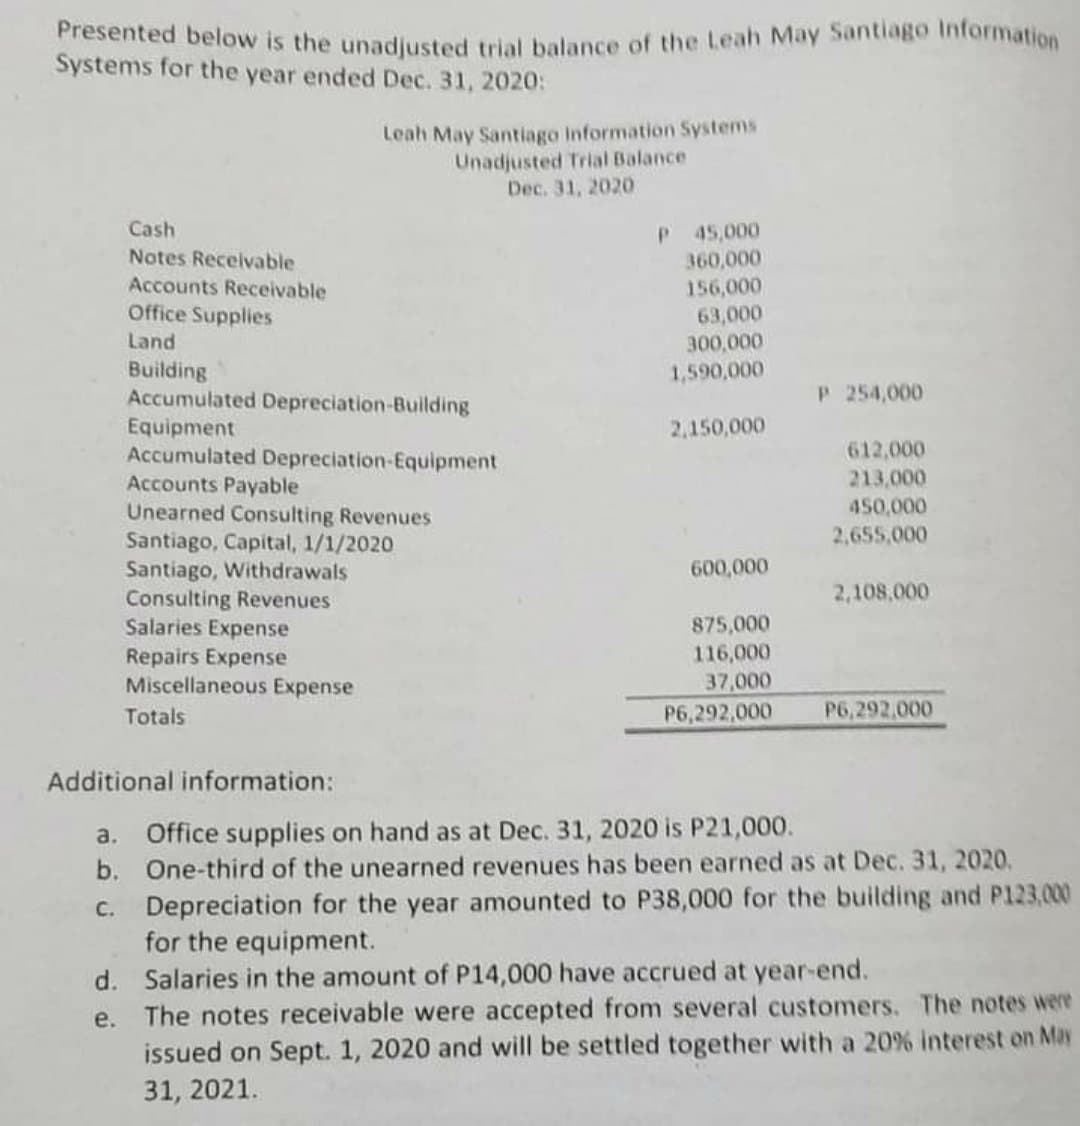 Presented below is the unadilusted trial balance of the Leah May Santiago Information
Systems for the year ended Dec. 31, 2020:
Leah May Santiago information Systems
Unadjusted Trial Balance
Dec. 31, 2020
Cash
45,000
360,000
156,000
63,000
Notes Receivable
Accounts Receivable
Office Supplies
Land
300,000
Building
Accumulated Depreciation-Building
Equipment
Accumulated Depreciation-Equipment
Accounts Payable
Unearned Consulting Revenues
Santiago, Capital, 1/1/2020
Santiago, Withdrawals
Consulting Revenues
Salaries Expense
1,590,000
P 254,000
2,150,000
612,000
213,000
450,000
2,655,000
600,000
2,108,000
Repairs Expense
Miscellaneous Expense
875,000
116,000
37,000
Totals
P6,292,000
P6,292,000
Additional information:
a. Office supplies on hand as at Dec. 31, 2020 is P21,000.
b. One-third of the unearned revenues has been earned as at Dec. 31, 2020.
c. Depreciation for the year amounted to P38,000 for the building and P123,000
for the equipment.
d. Salaries in the amount of P14,000 have accrued at year-end.
The notes receivable were accepted from several customers. The notes were
issued on Sept. 1, 2020 and will be settled together with a 20% interest on May
е.
31, 2021.
